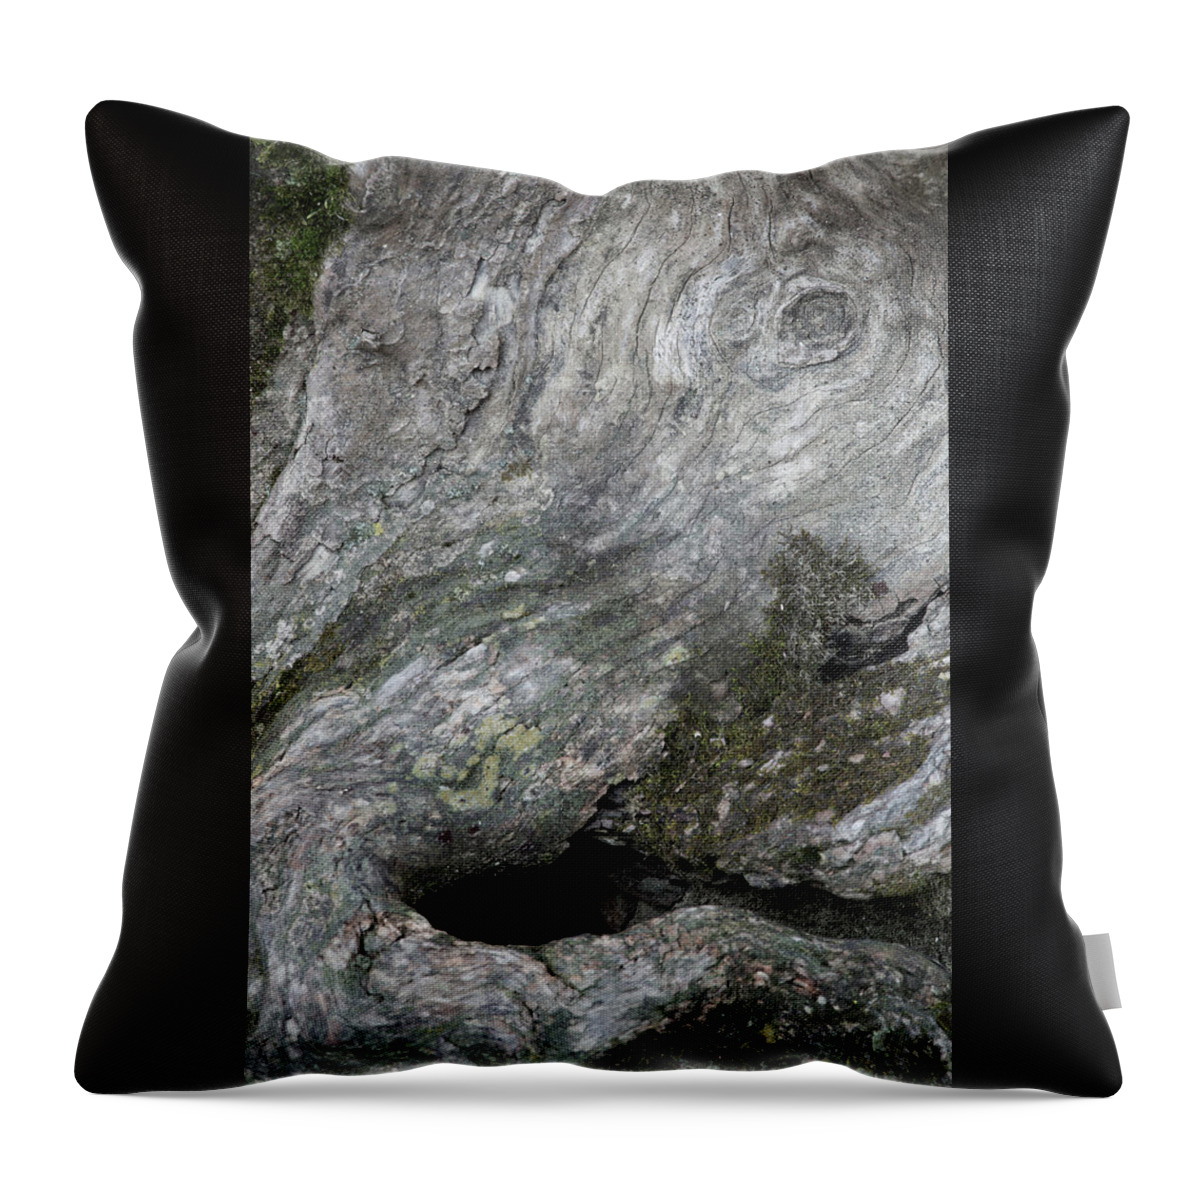 Elephant Trunk Throw Pillow featuring the photograph Elephant Trunk by Dale Kincaid